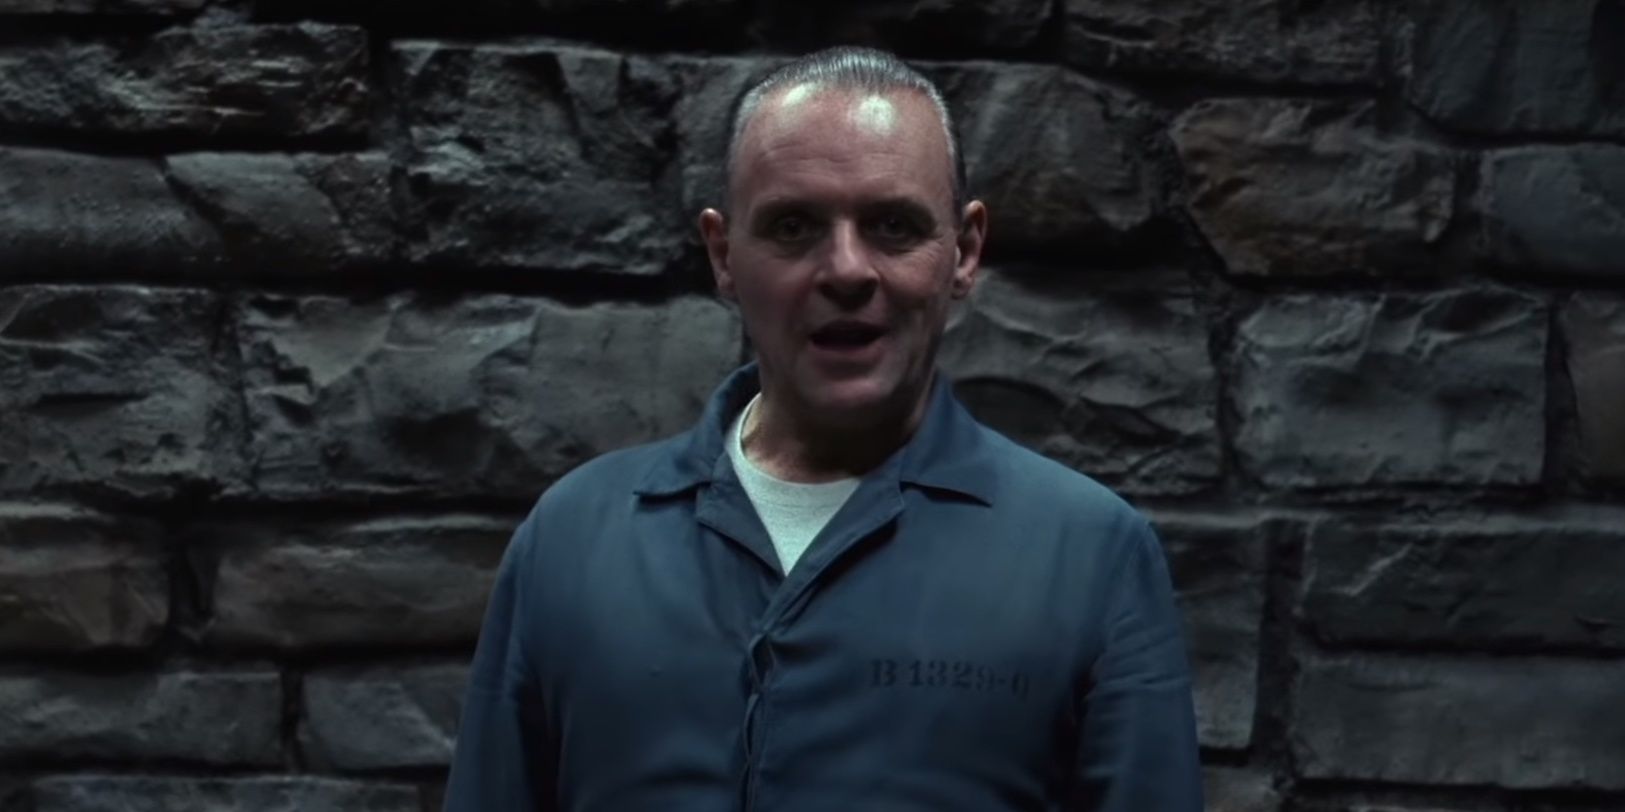 10 Weird Things Cut From The Silence Of The Lambs Movie (That Were In The Book)